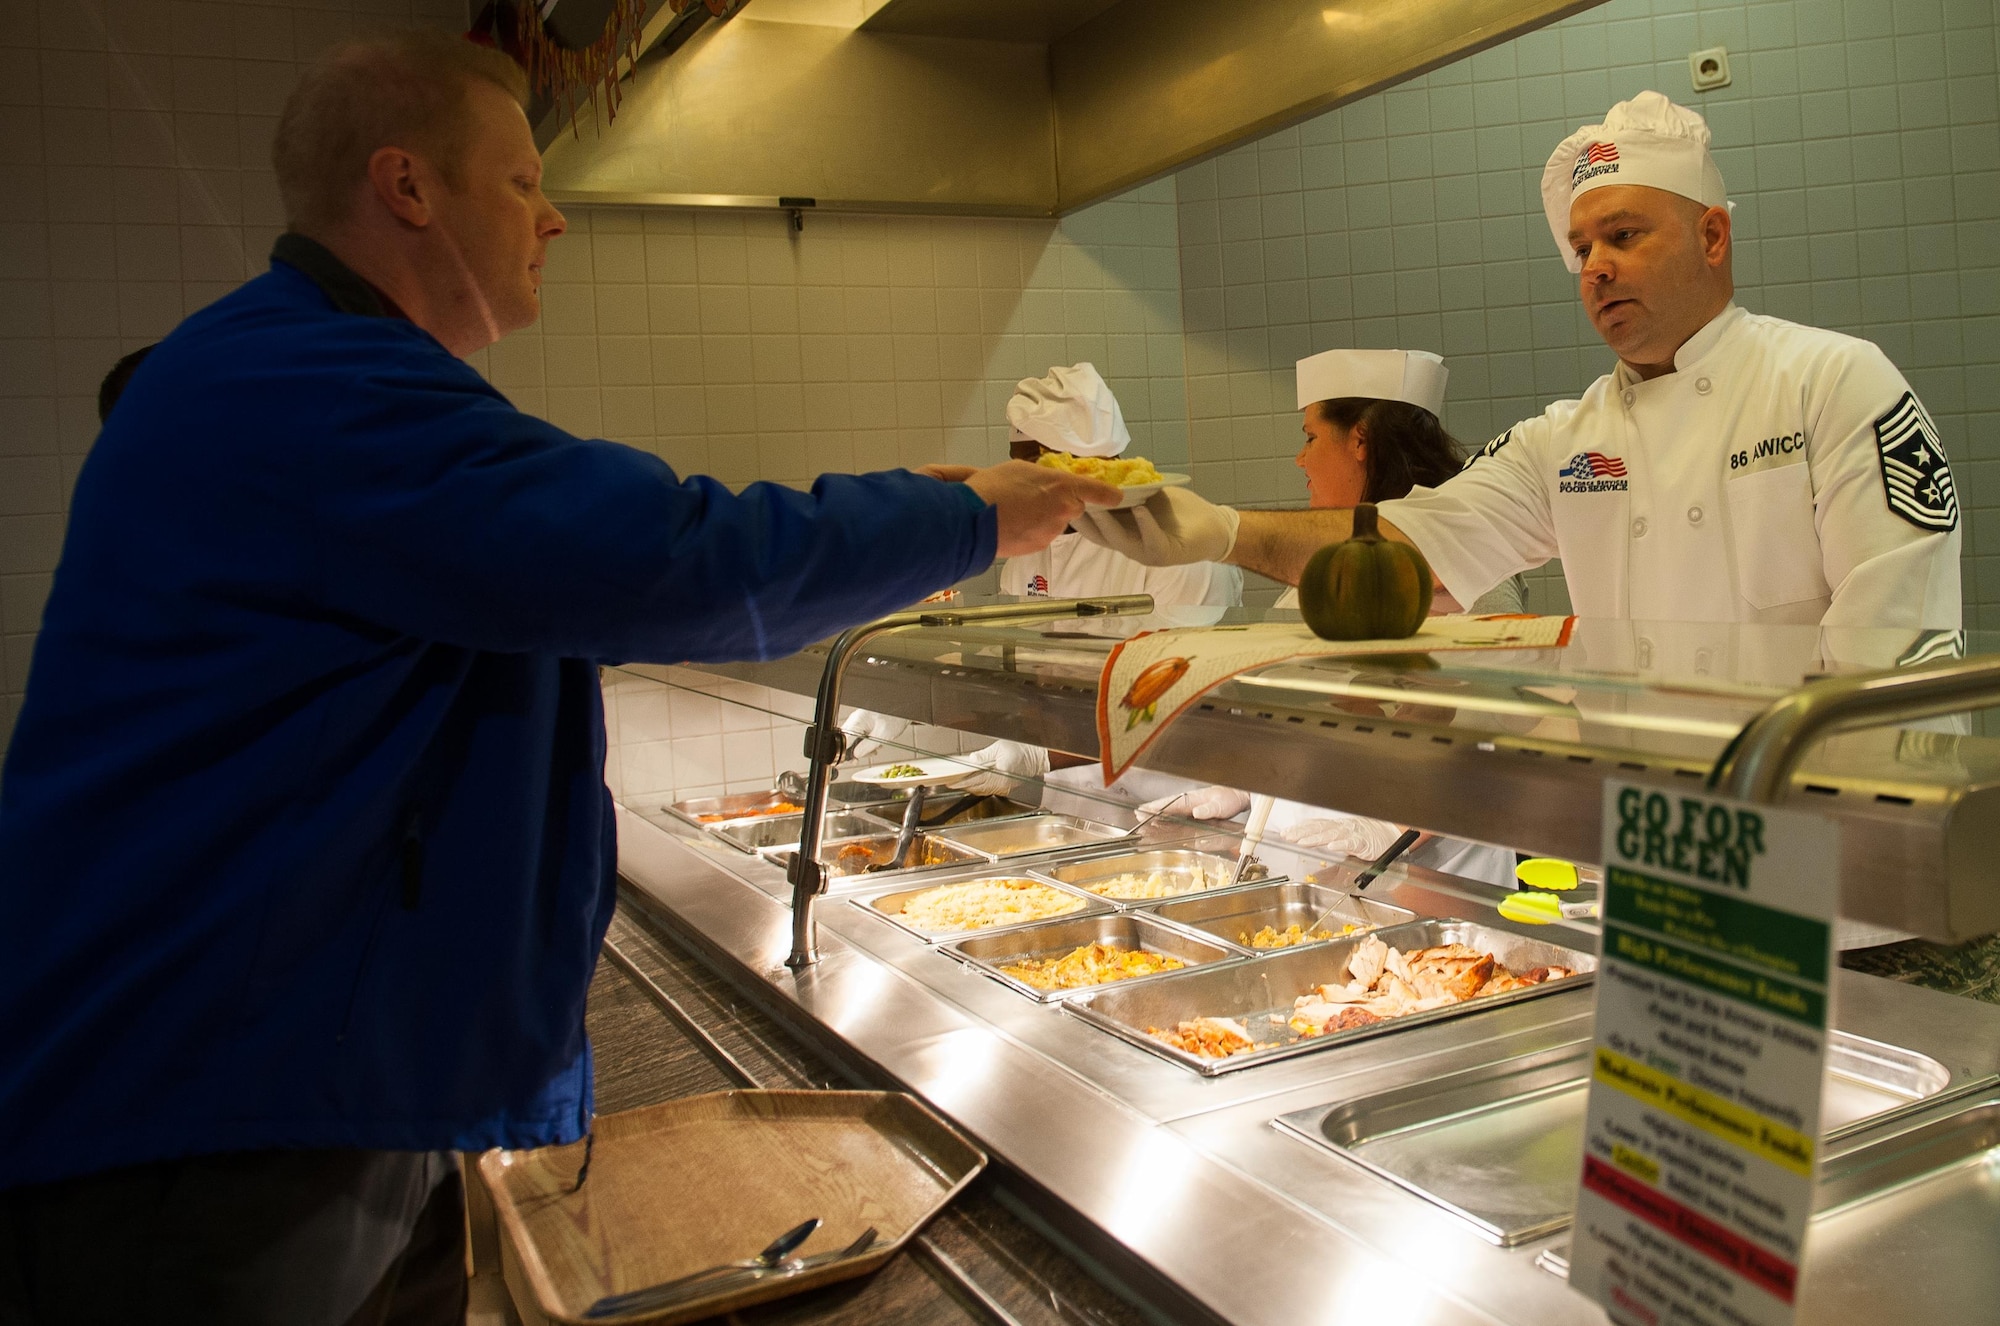 Chief Master Sgt. Aaron Bennett, 86th Airlift Wing command chief, serves Airmen during a Thanksgiving meal at Ramstein Air Base, Germany, Nov. 24, 2016. Every year at Ramstein, leadership across the Kaiserslautern Military Community visits the base’s dining facility to cook food and meet Airmen during Thanksgiving. Menu items included turkey, prime rib, ham, mashed potatoes and dressing. In the U.S., the modern Thanksgiving holiday tradition can trace its origins back to 1621 in the heart of a newly-founded city called Plymouth in present-day Massachusetts. However, the first nationwide Thanksgiving proclamation was made by the first president of the U.S., George Washington, in 1789. Since then, the holiday has been celebrated by an entire nation to recount the blessings of the year. (U.S. Air Force photo by Airman 1st Class Lane T. Plummer)